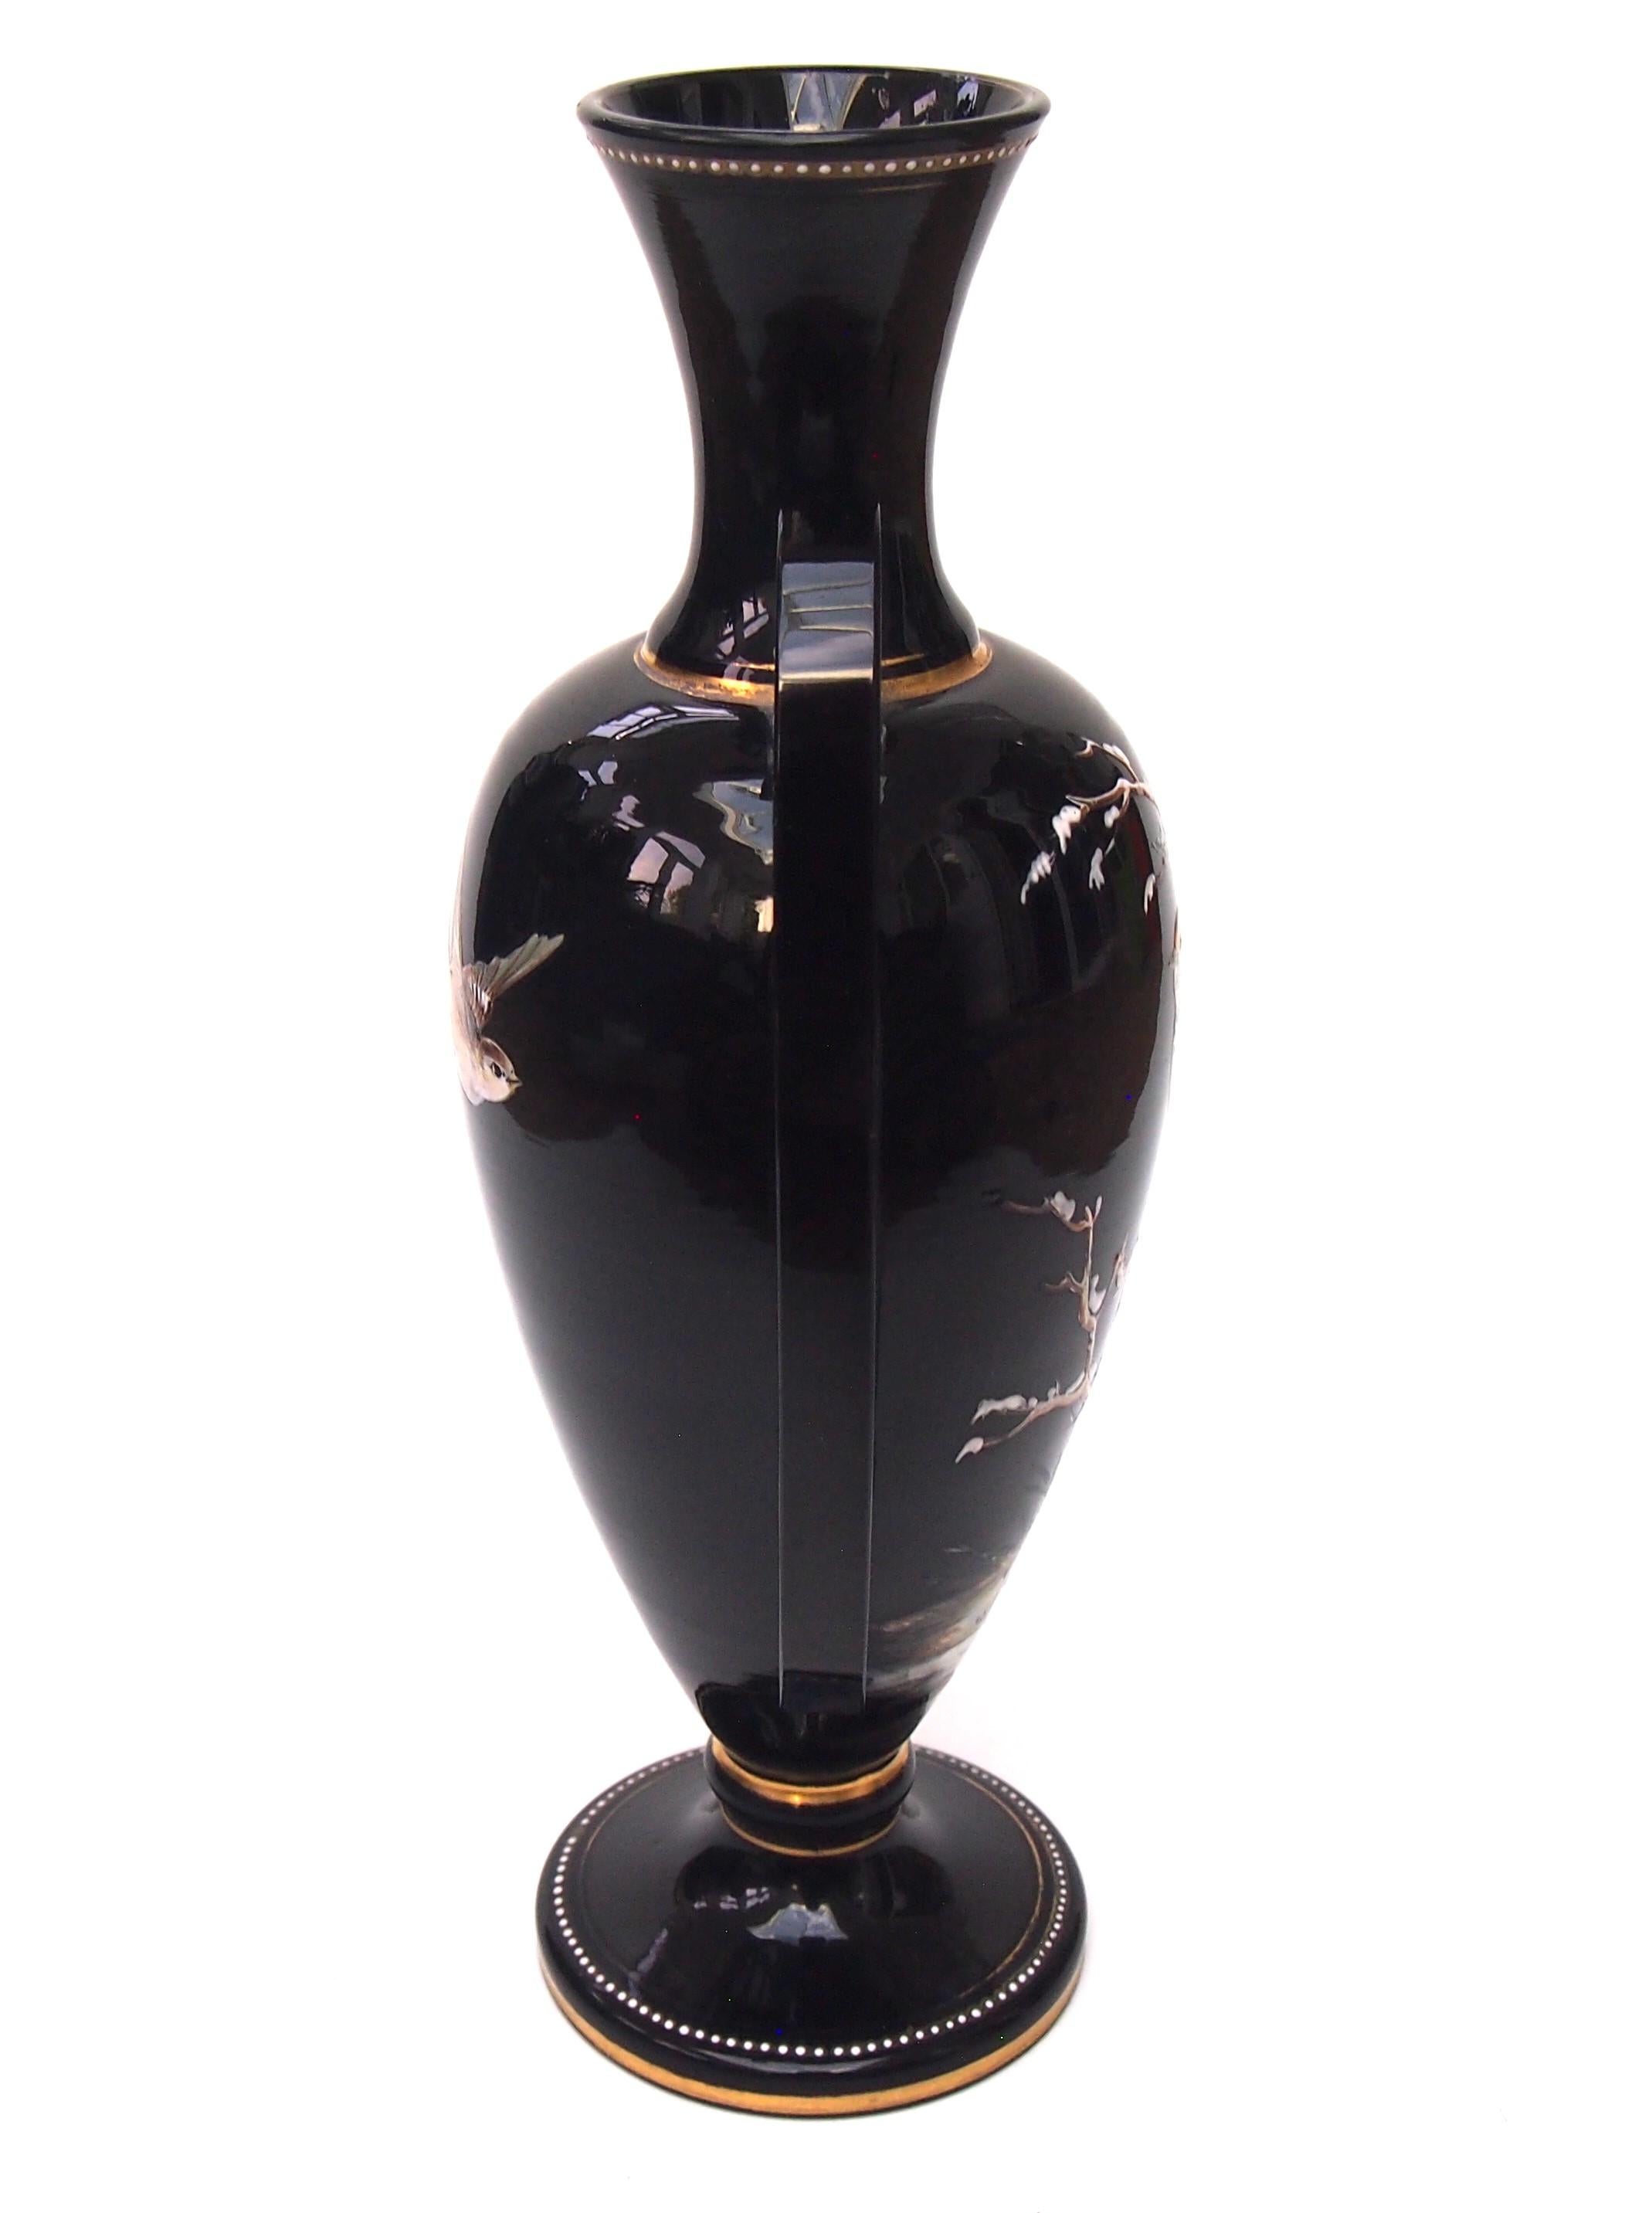 Fabulous Harrach vase in the classic Victorian style with their signature winged applications. The Vase is enamelled and gilded with a cute bird on snowy branches to the front and a bird in flight to the rear. The long vase 'wings' are applied and